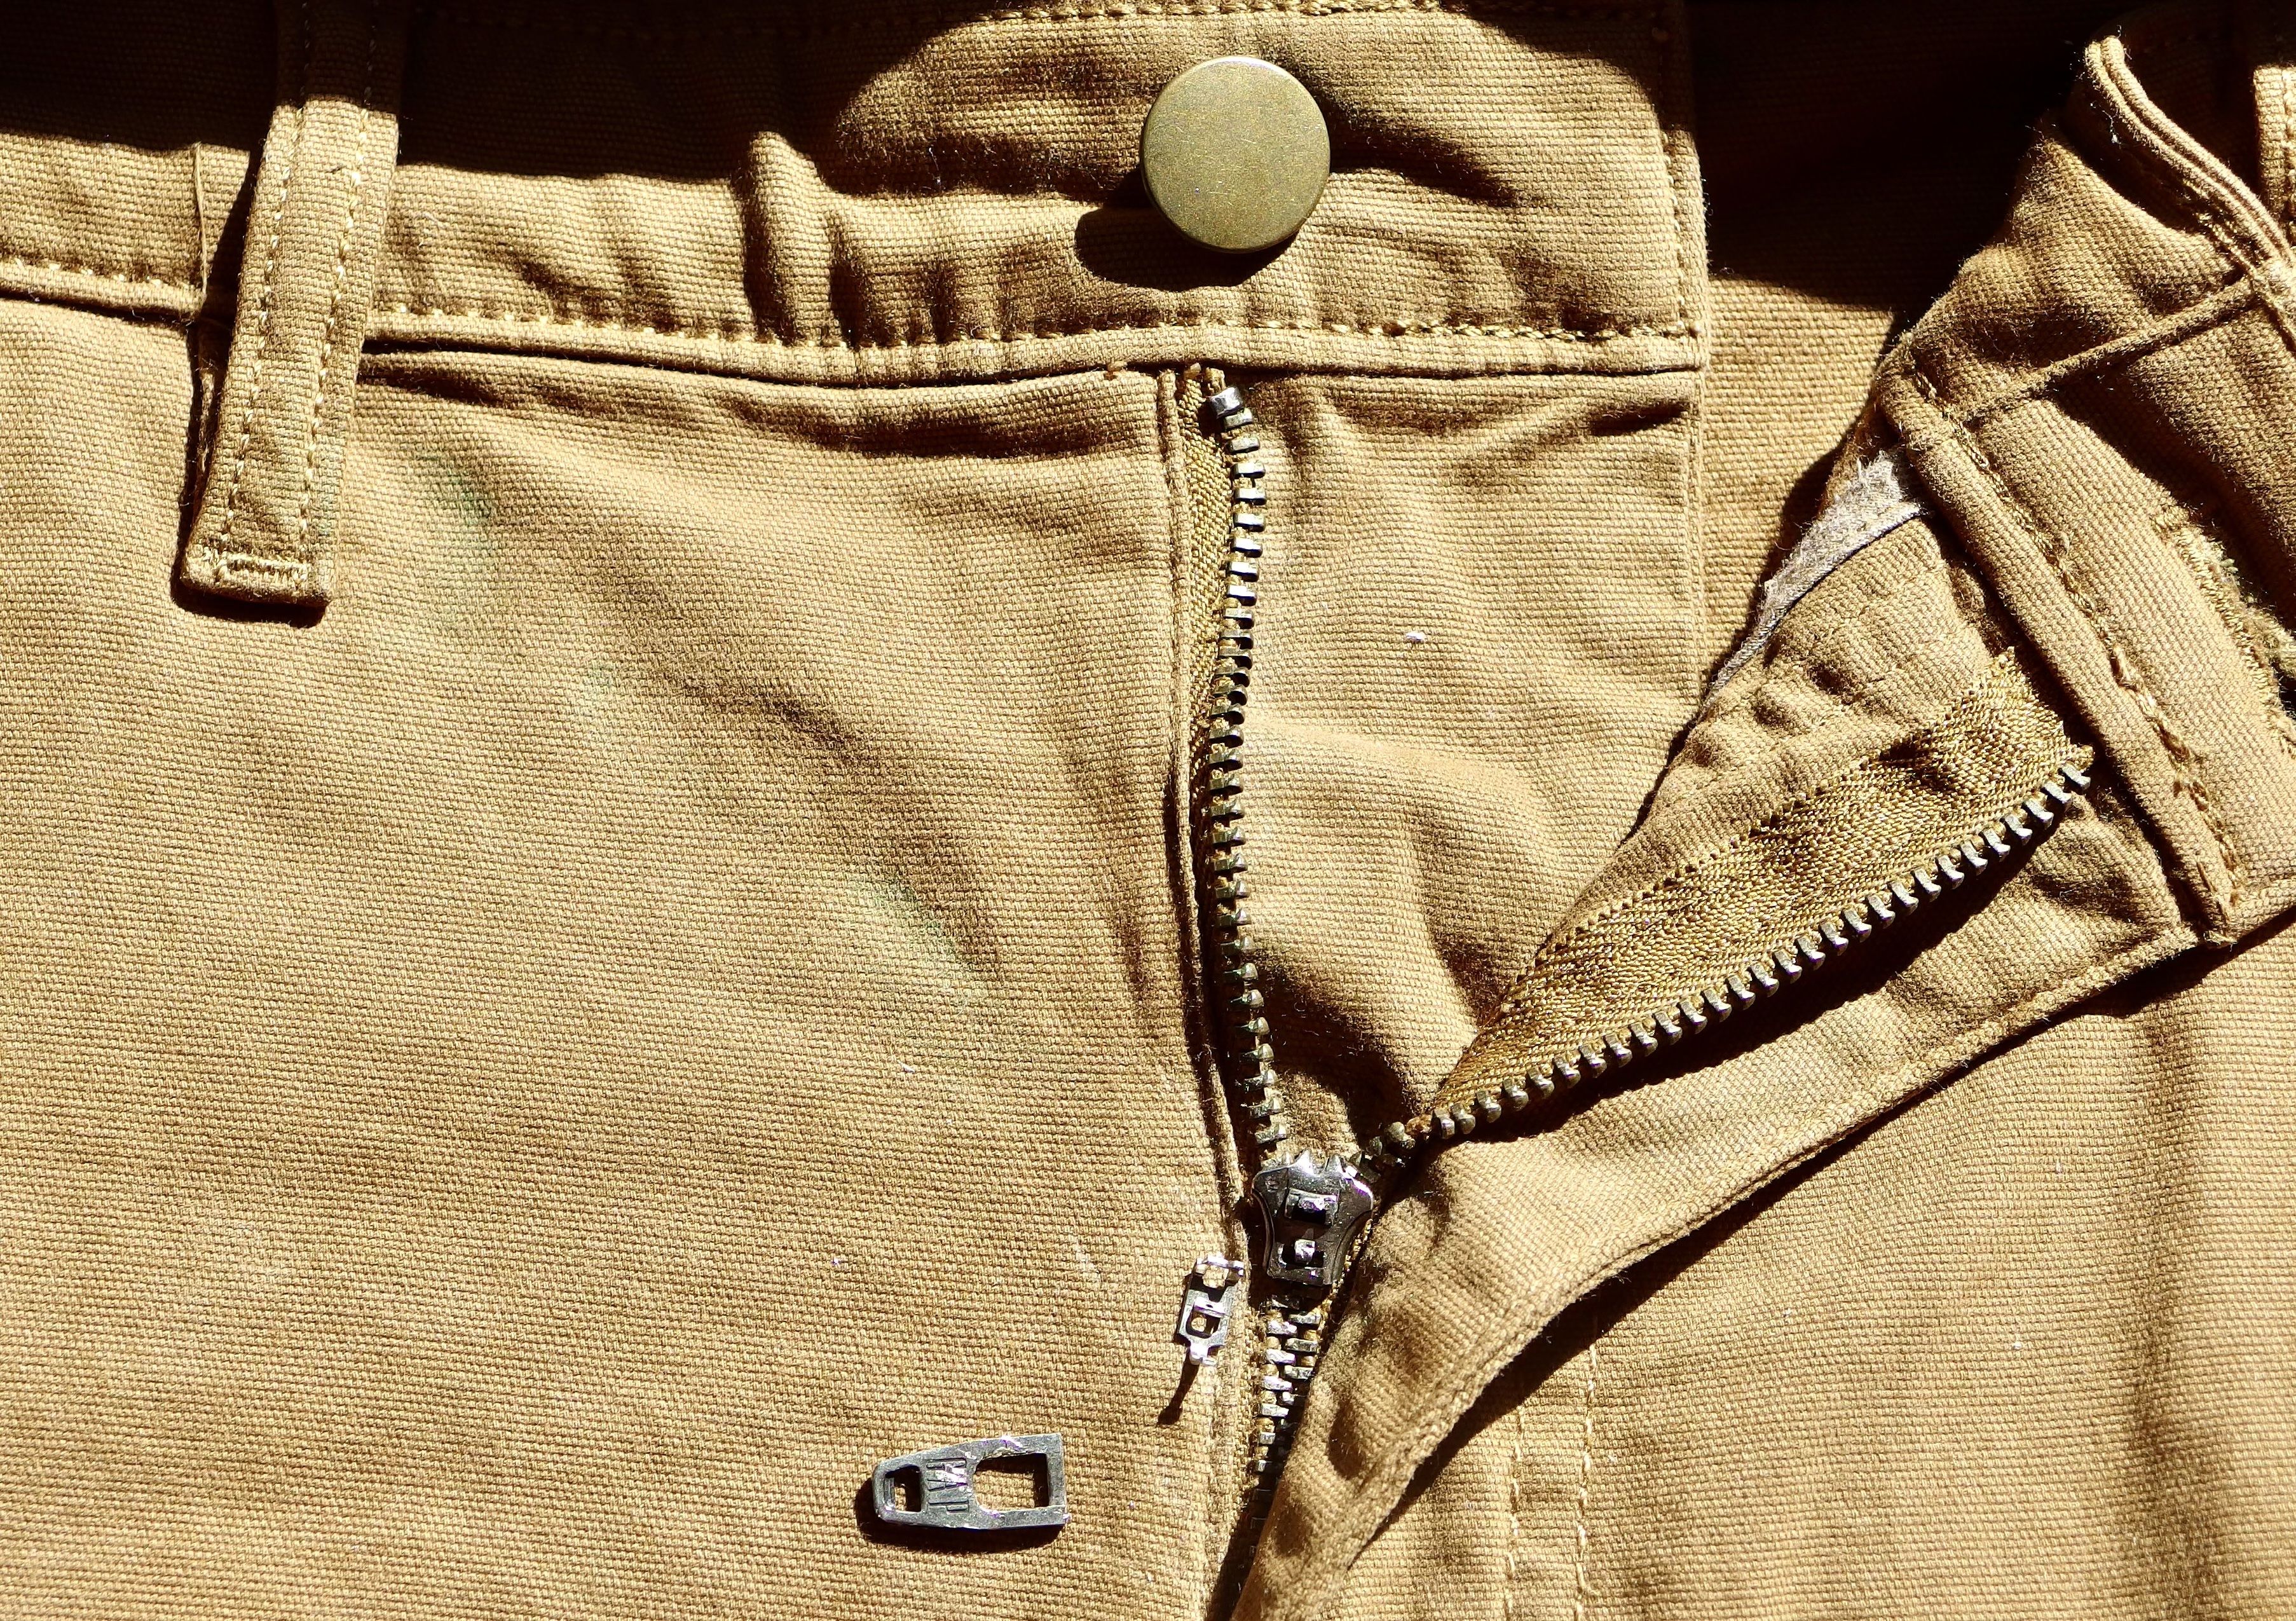 Easy zipper fixes to save your clothes and gear rather than throw